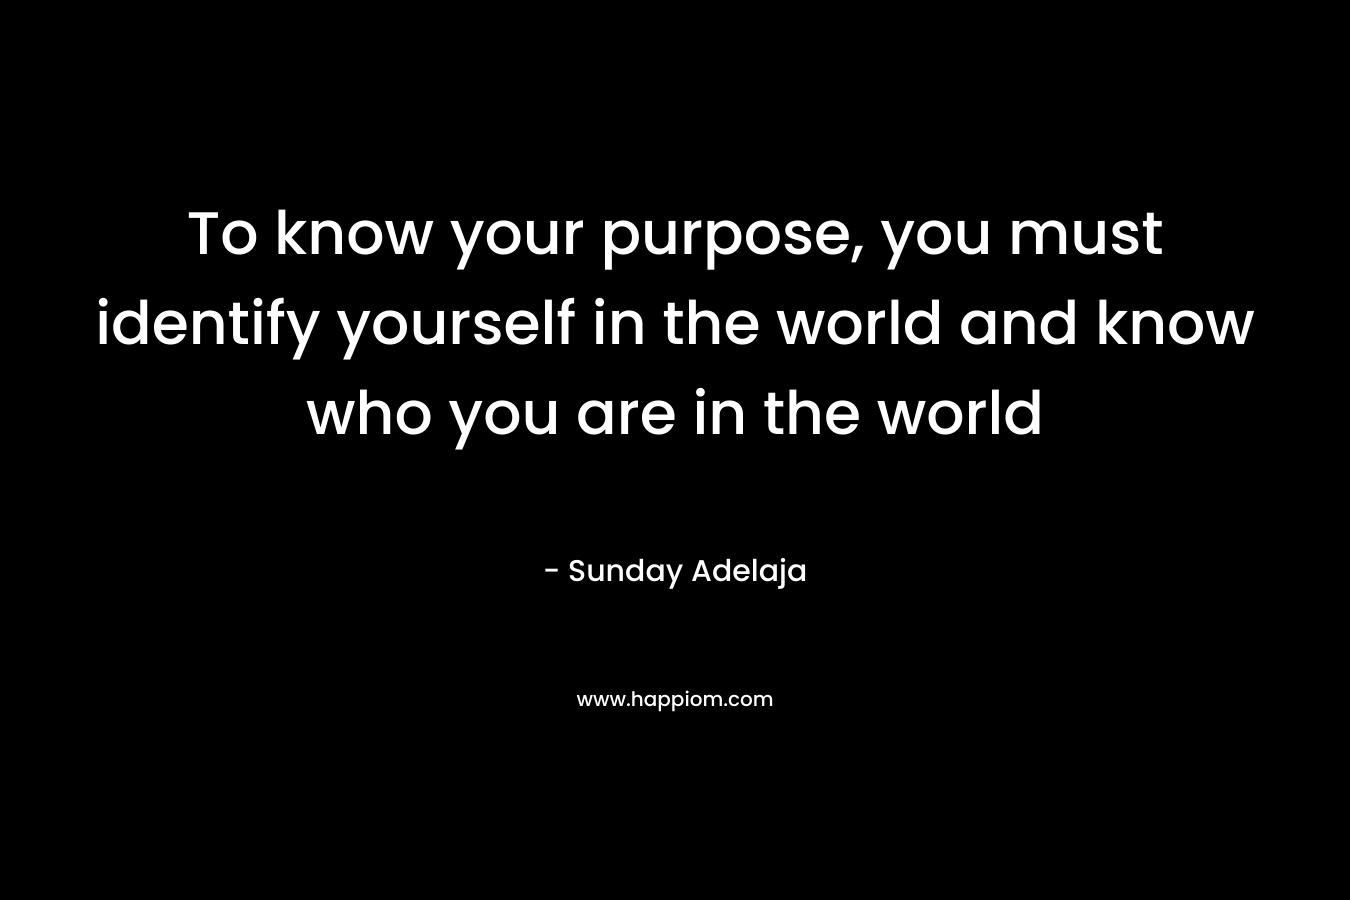 To know your purpose, you must identify yourself in the world and know who you are in the world